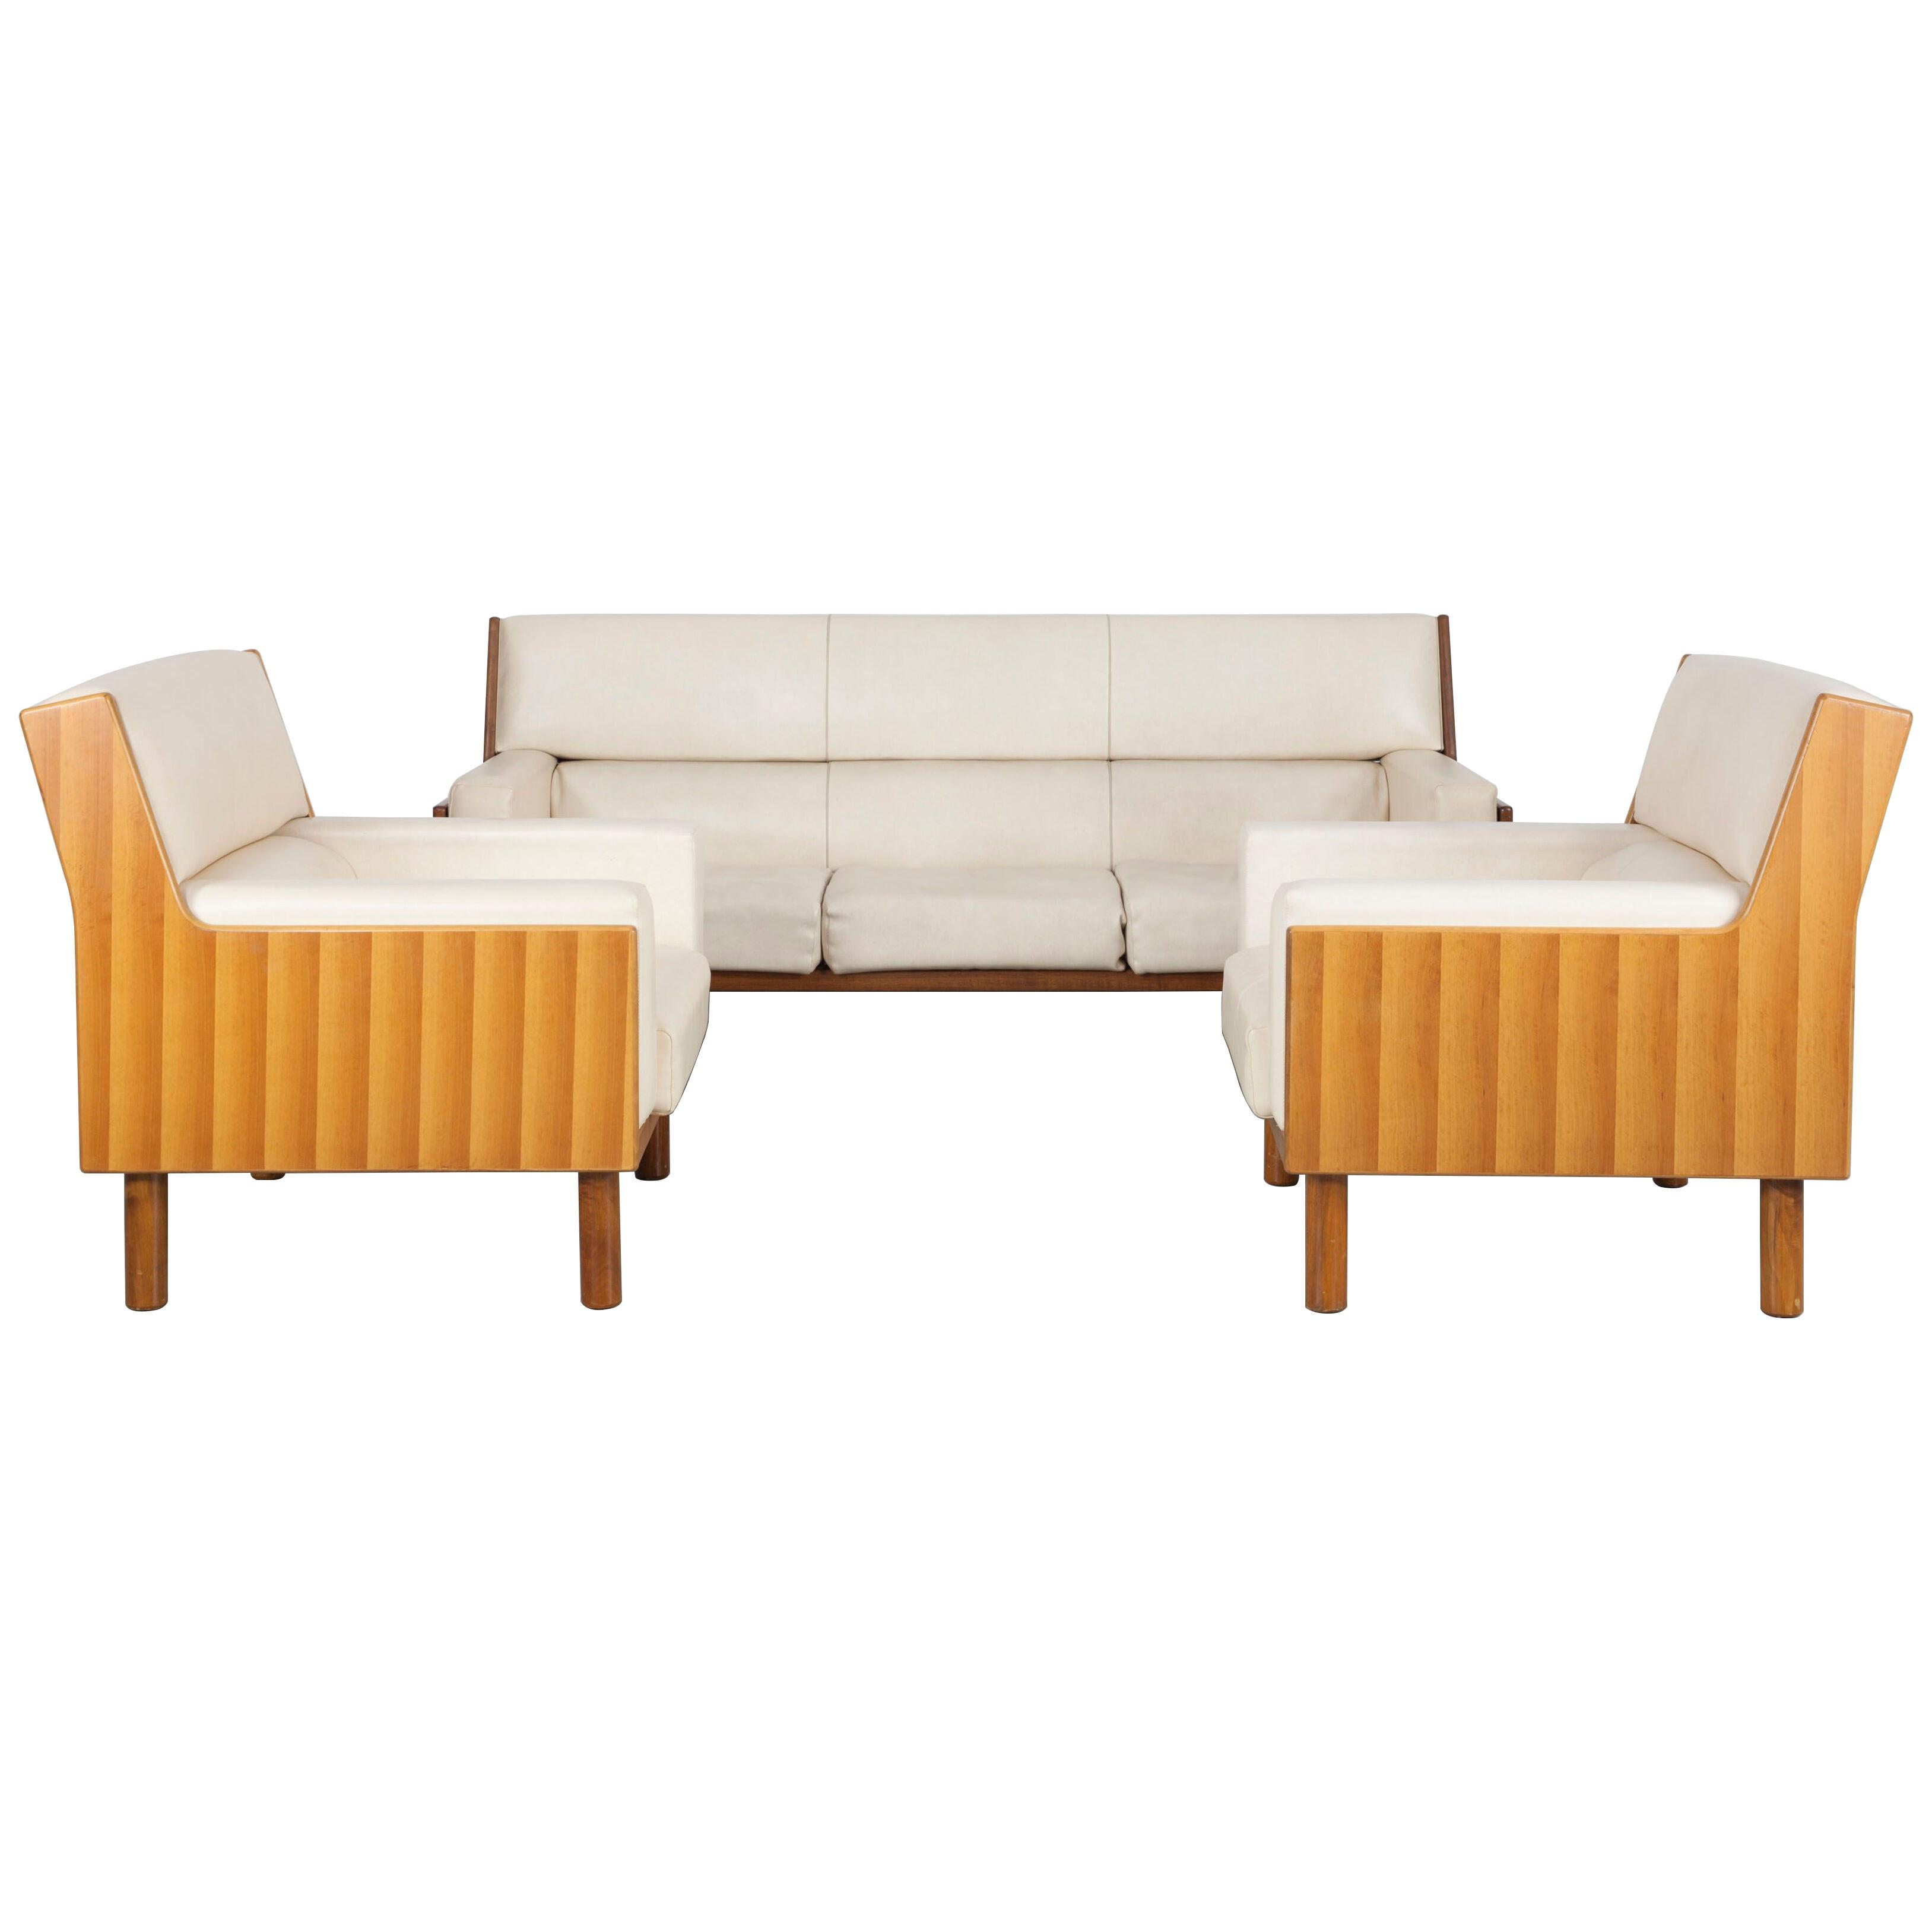 Set of 2 Armchairs and 1 Couch, Manufactured by Anonima Castelli Bologna, 1950s